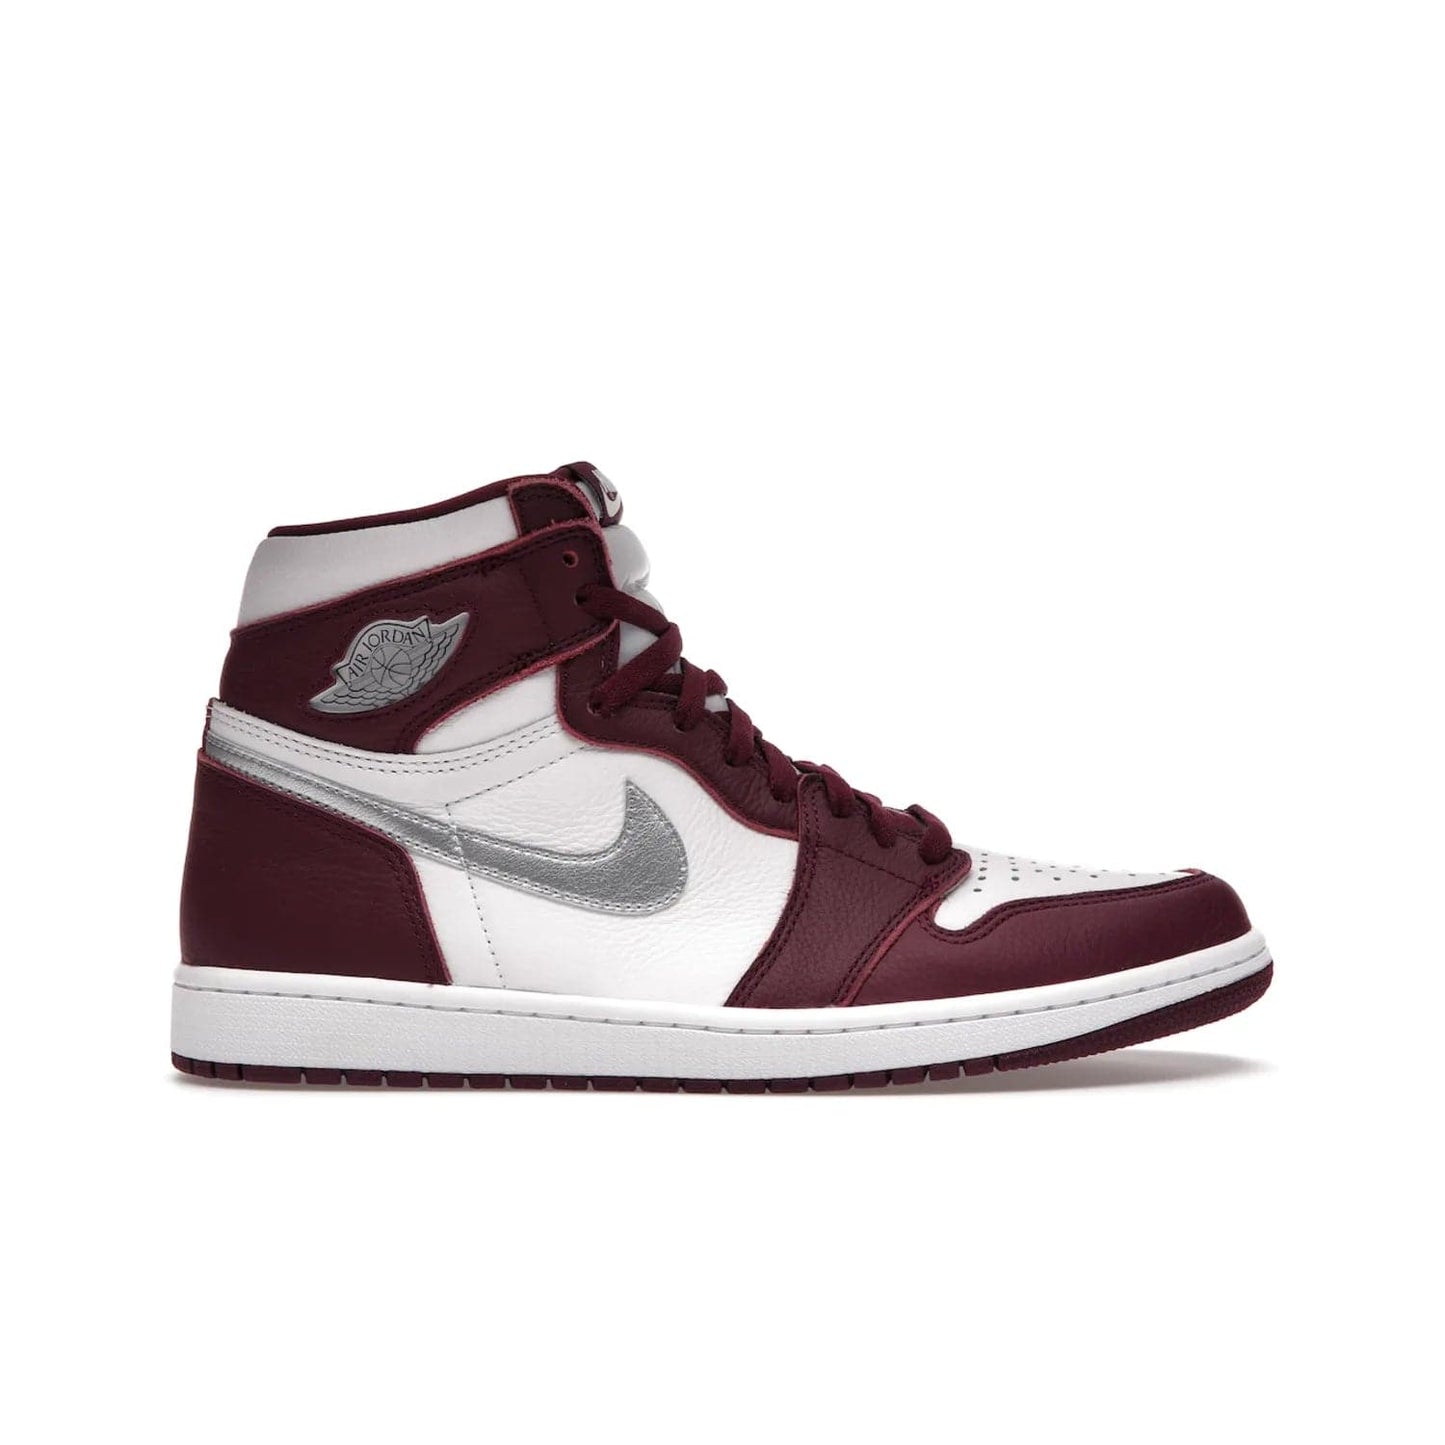 Jordan 1 Retro High OG Bordeaux - Image 1 - Only at www.BallersClubKickz.com - Shop the classic Air Jordan 1 High Bordeaux with a modern high-top cut. The timeless Bordeaux and White-Metallic Silver colorway, releasing Nov 20, 2021, is perfect for practice or a night out.